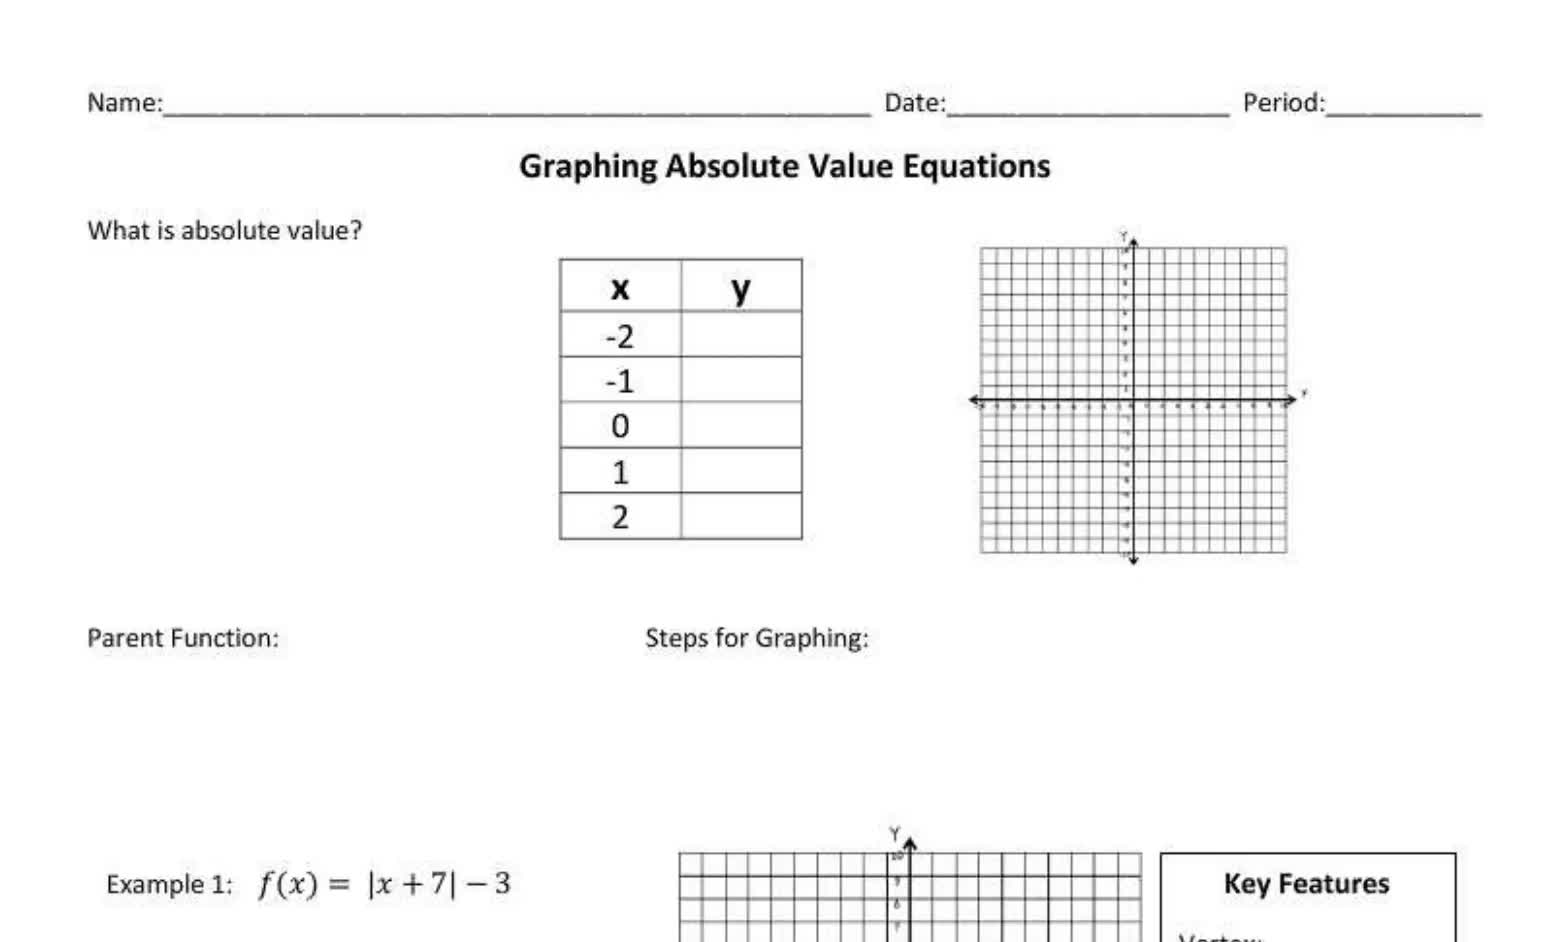 Graphing Absolute Value Functions (Regular)